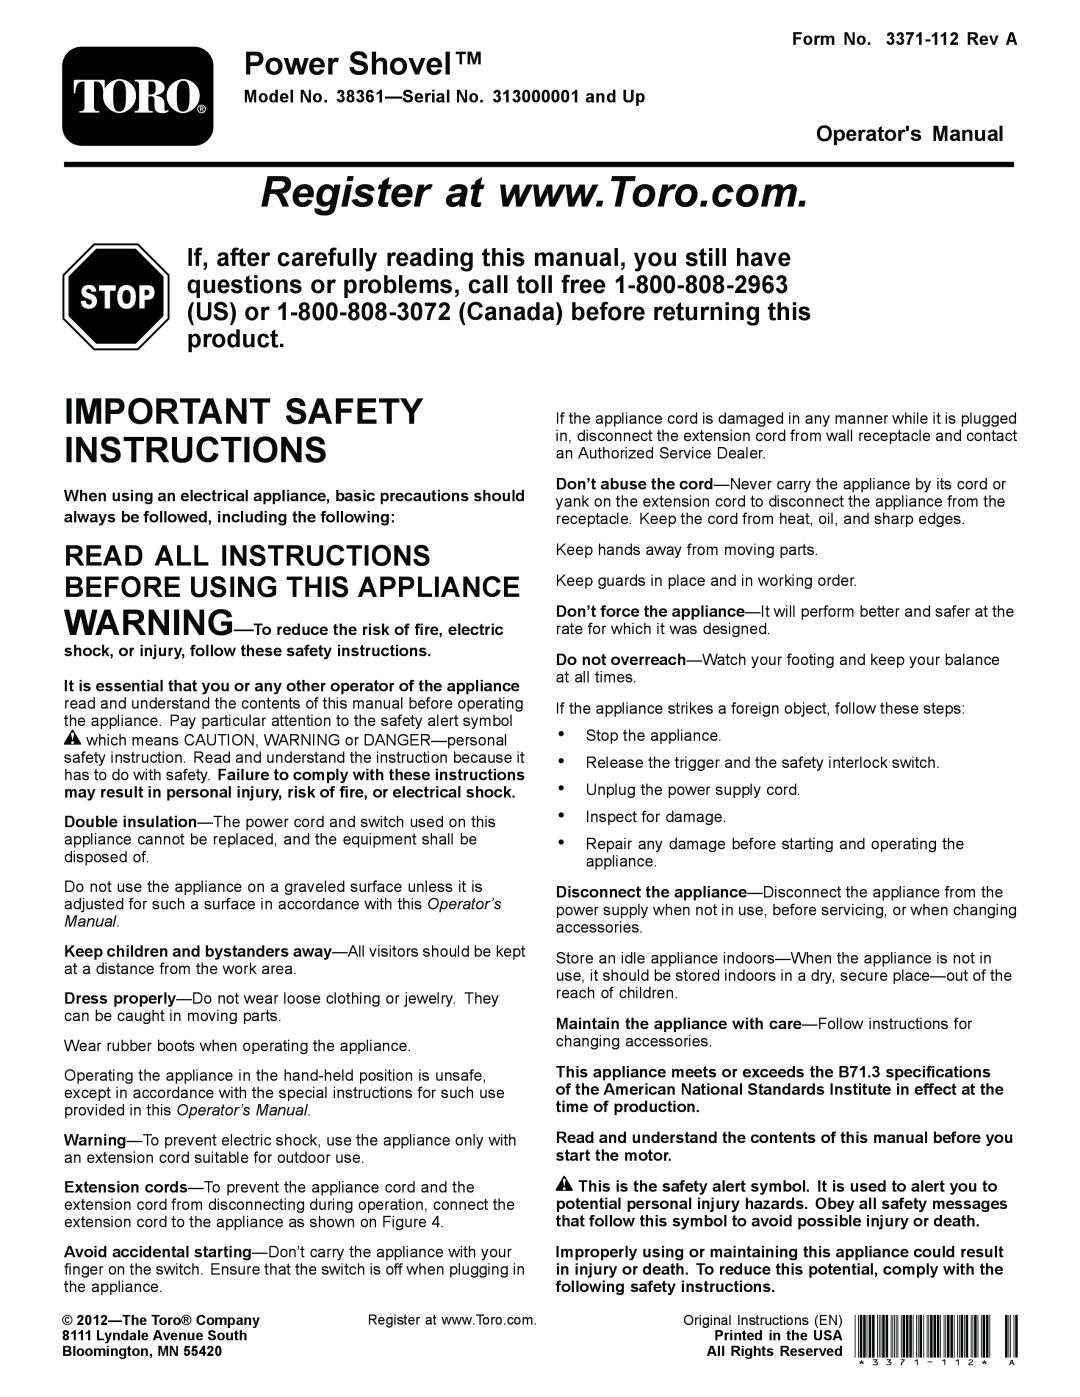 Toro 38361 important safety instructions Power Shovel, Important Safety Instructions, Operators Manual 